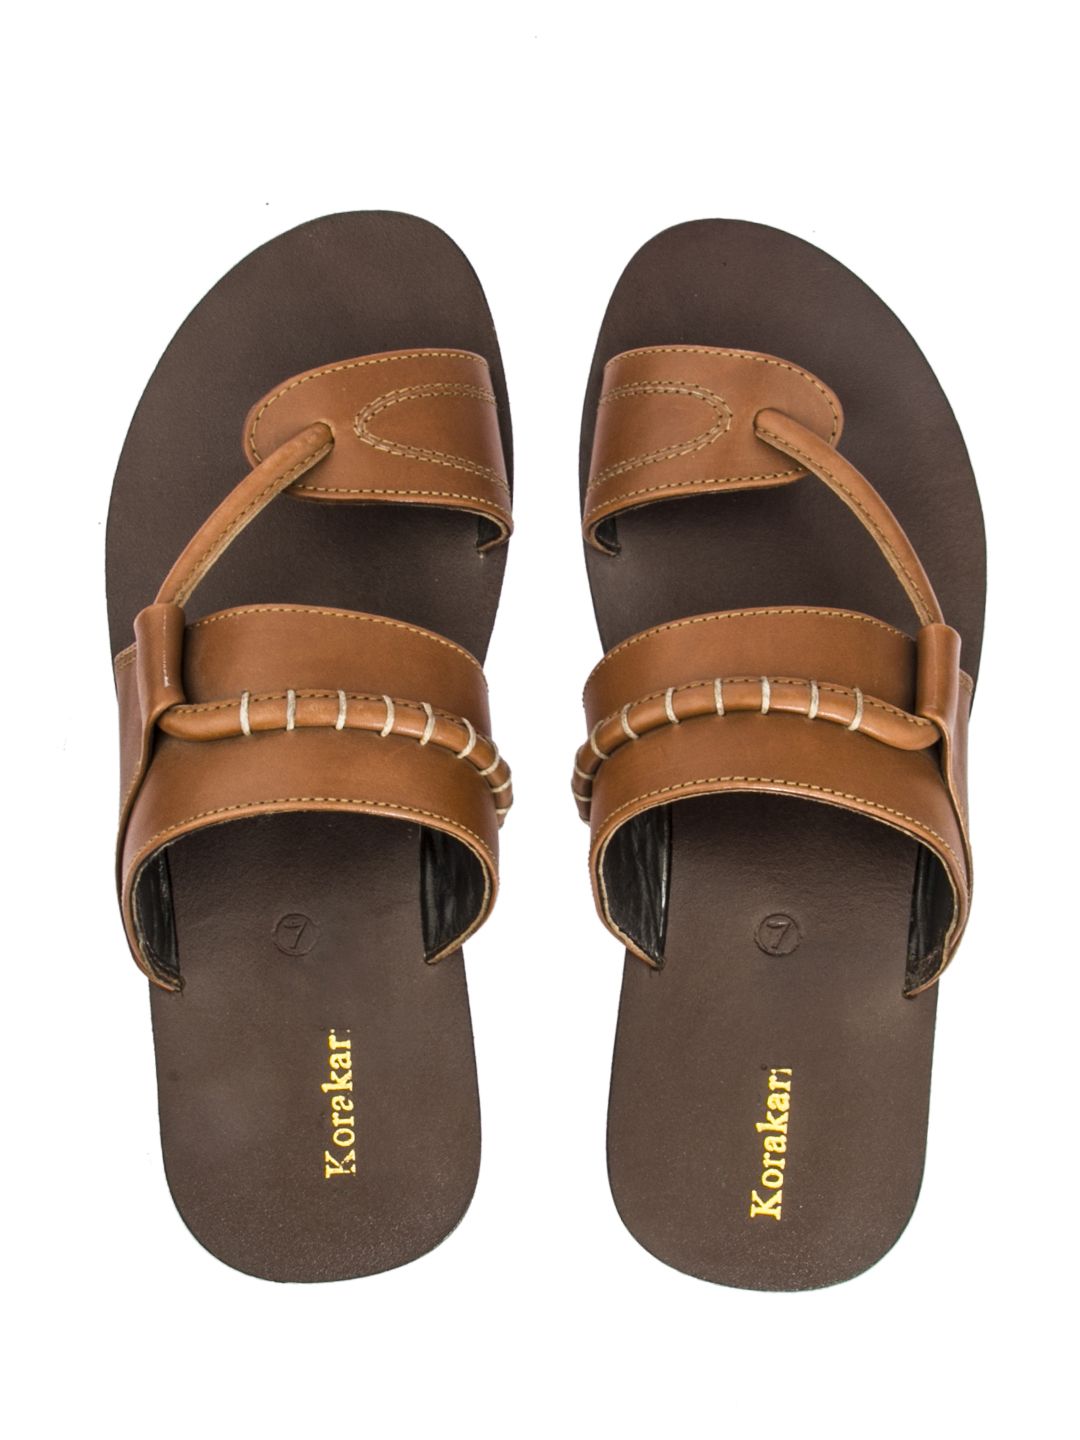 Timeless Style: Handmade Tan and Brown Leather Sandals for Men